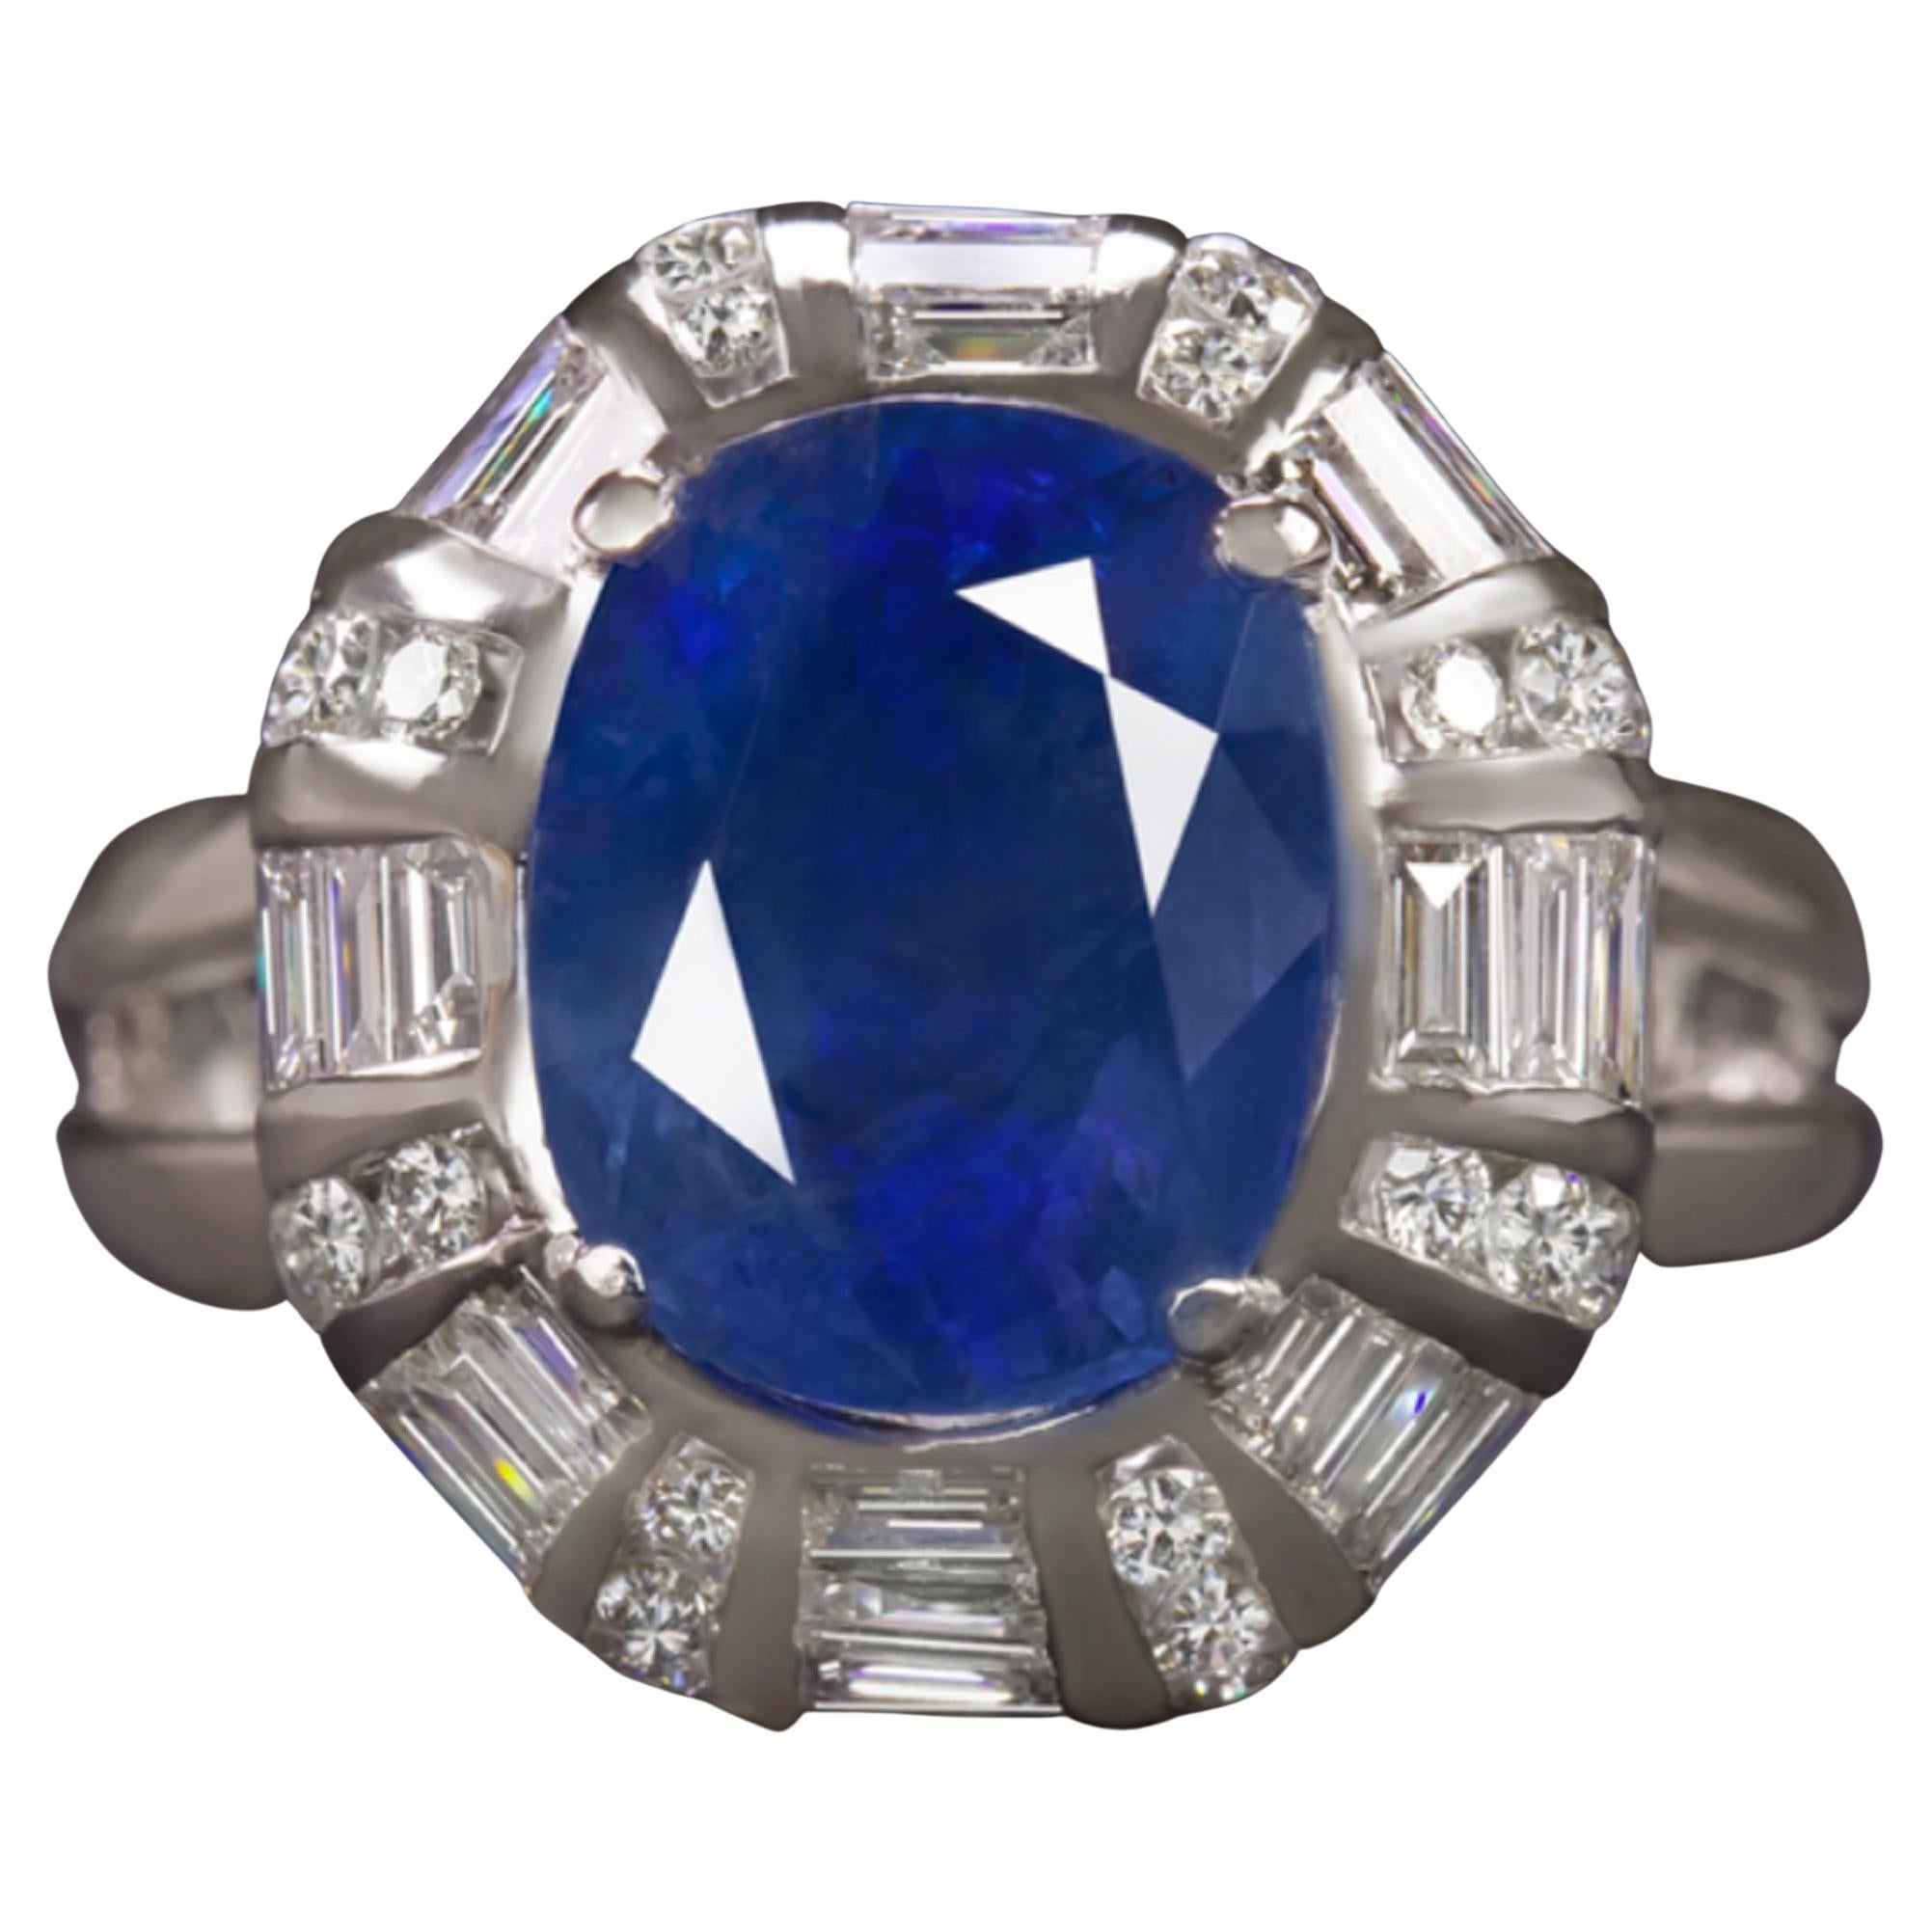 eye-catching and high quality 10.50cttw sapphire and diamond ring truly brings the glamour and the sparkle! The impressively large 6.00ct AGL certified unheated oval sapphire center is surrounded by a shimmering halo of high quality round and